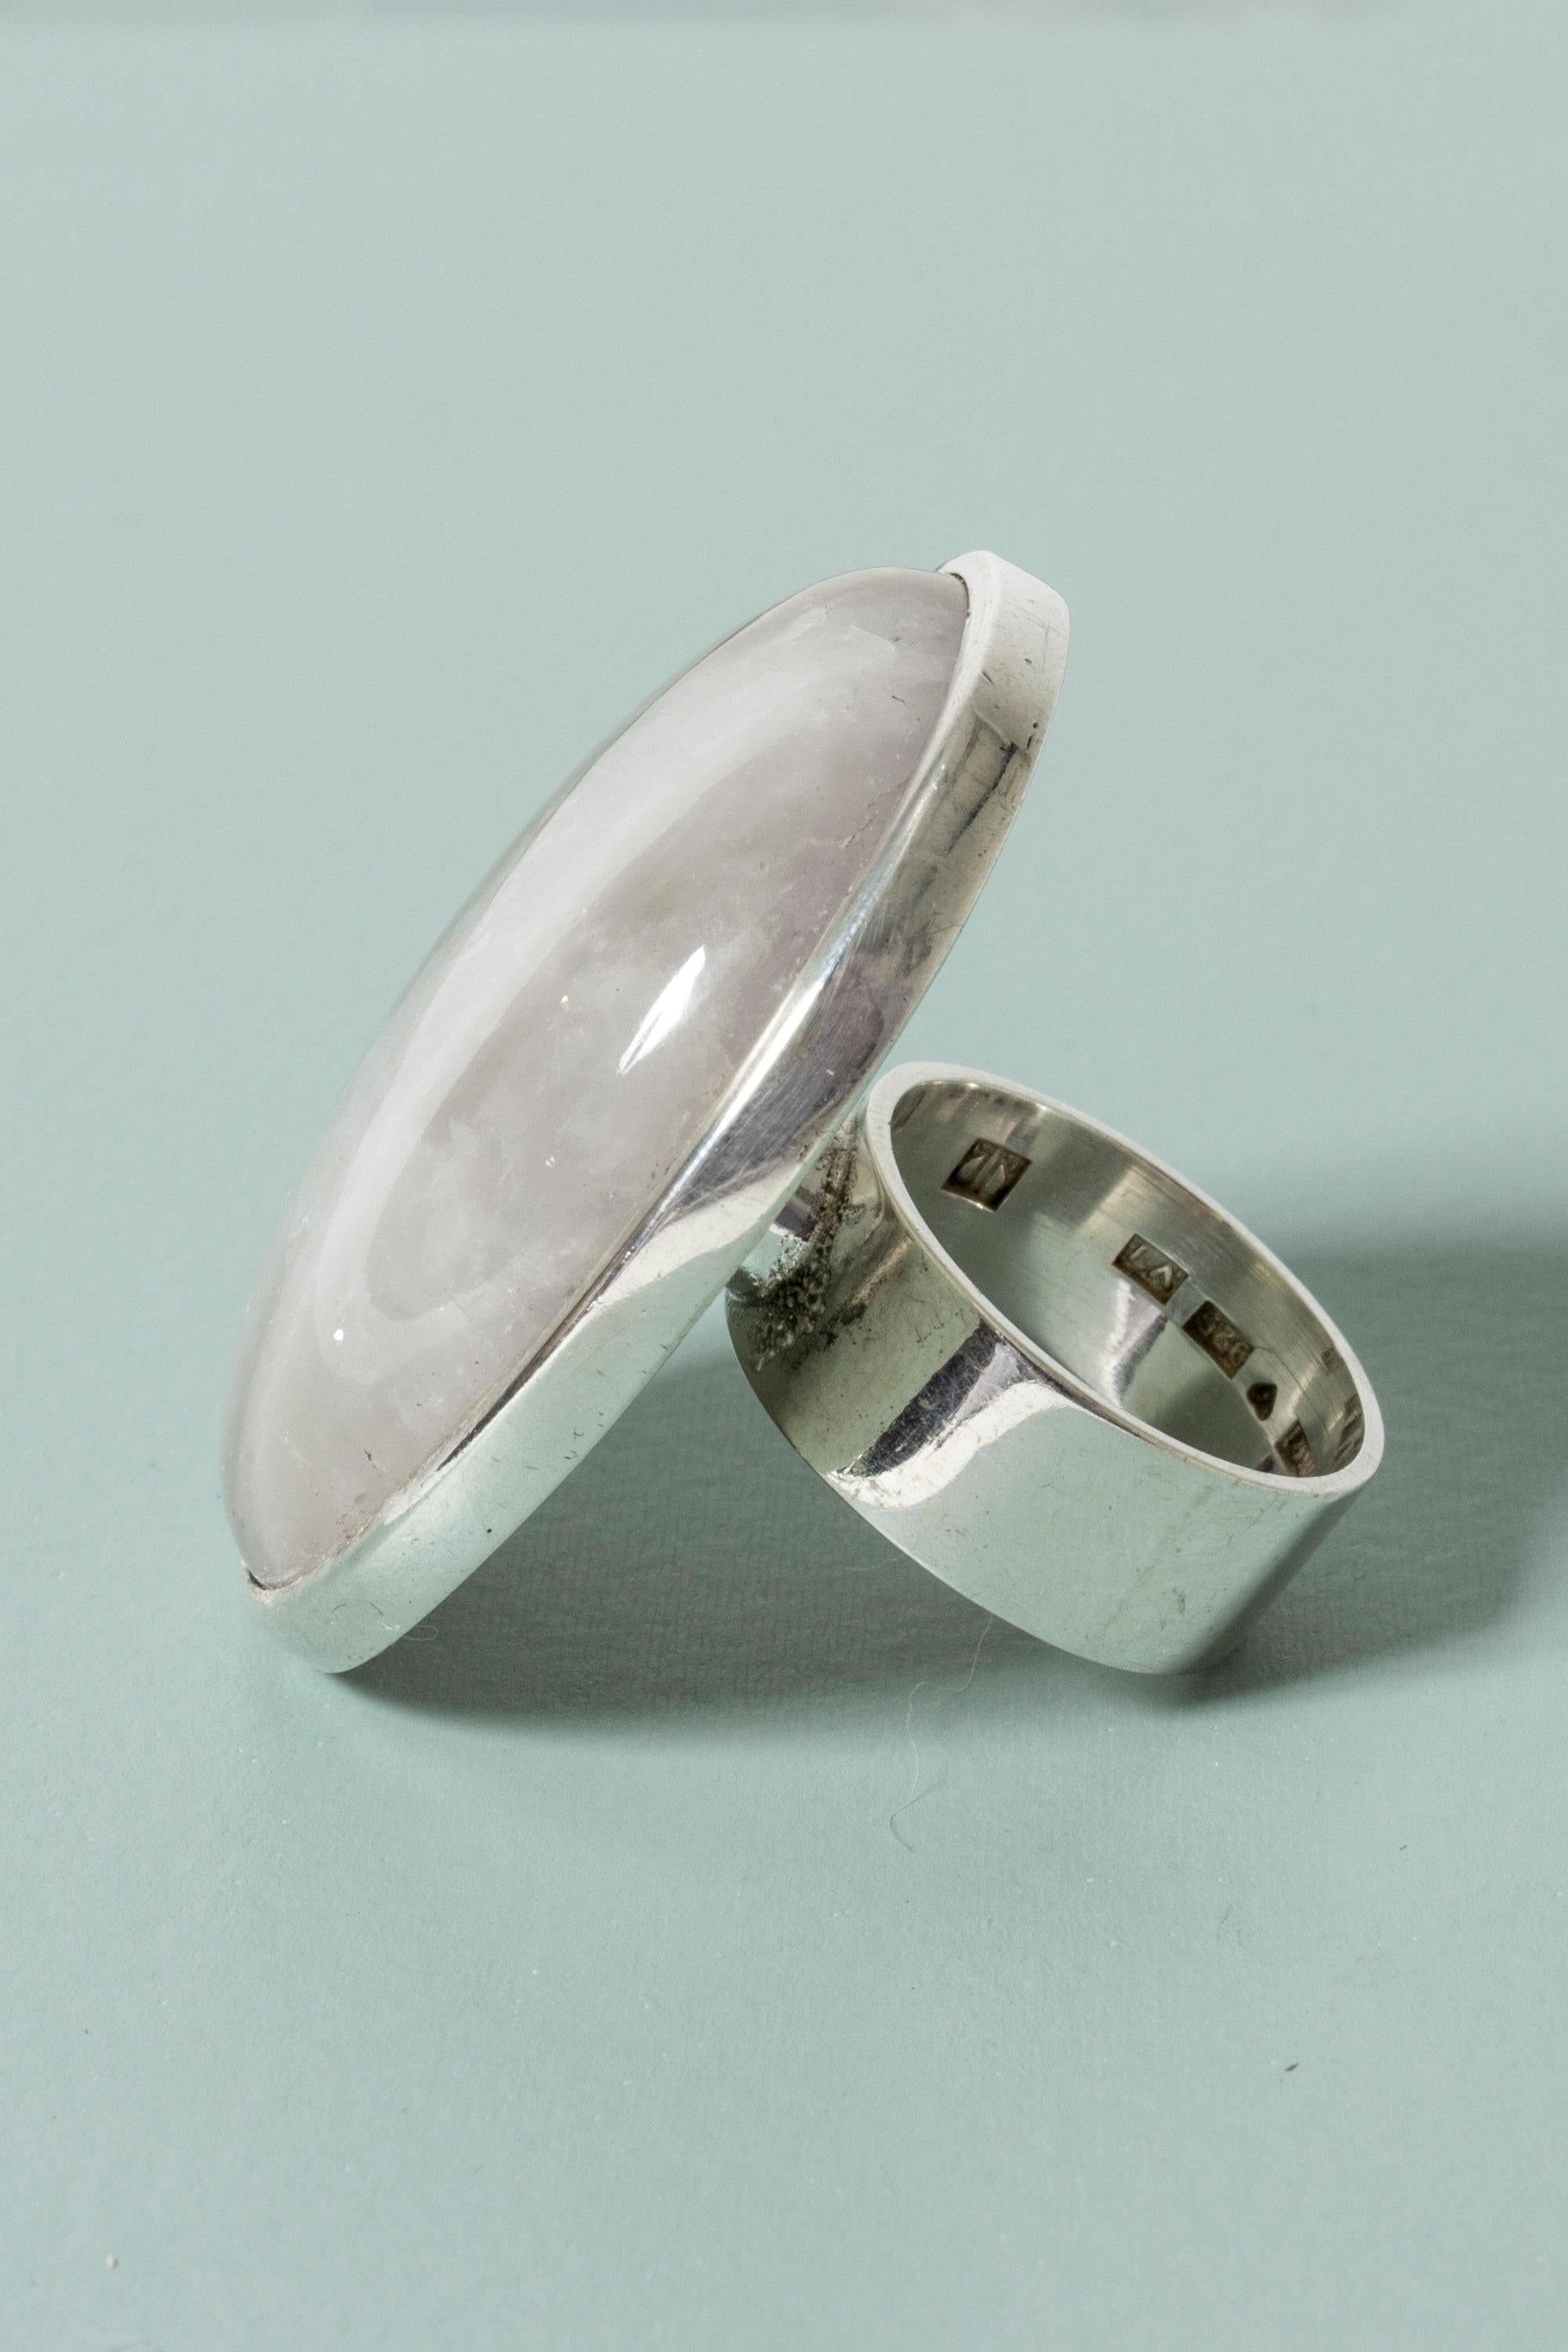 Modernist Silver and Agate Ring from Kaunis Koru, Finland, 1974